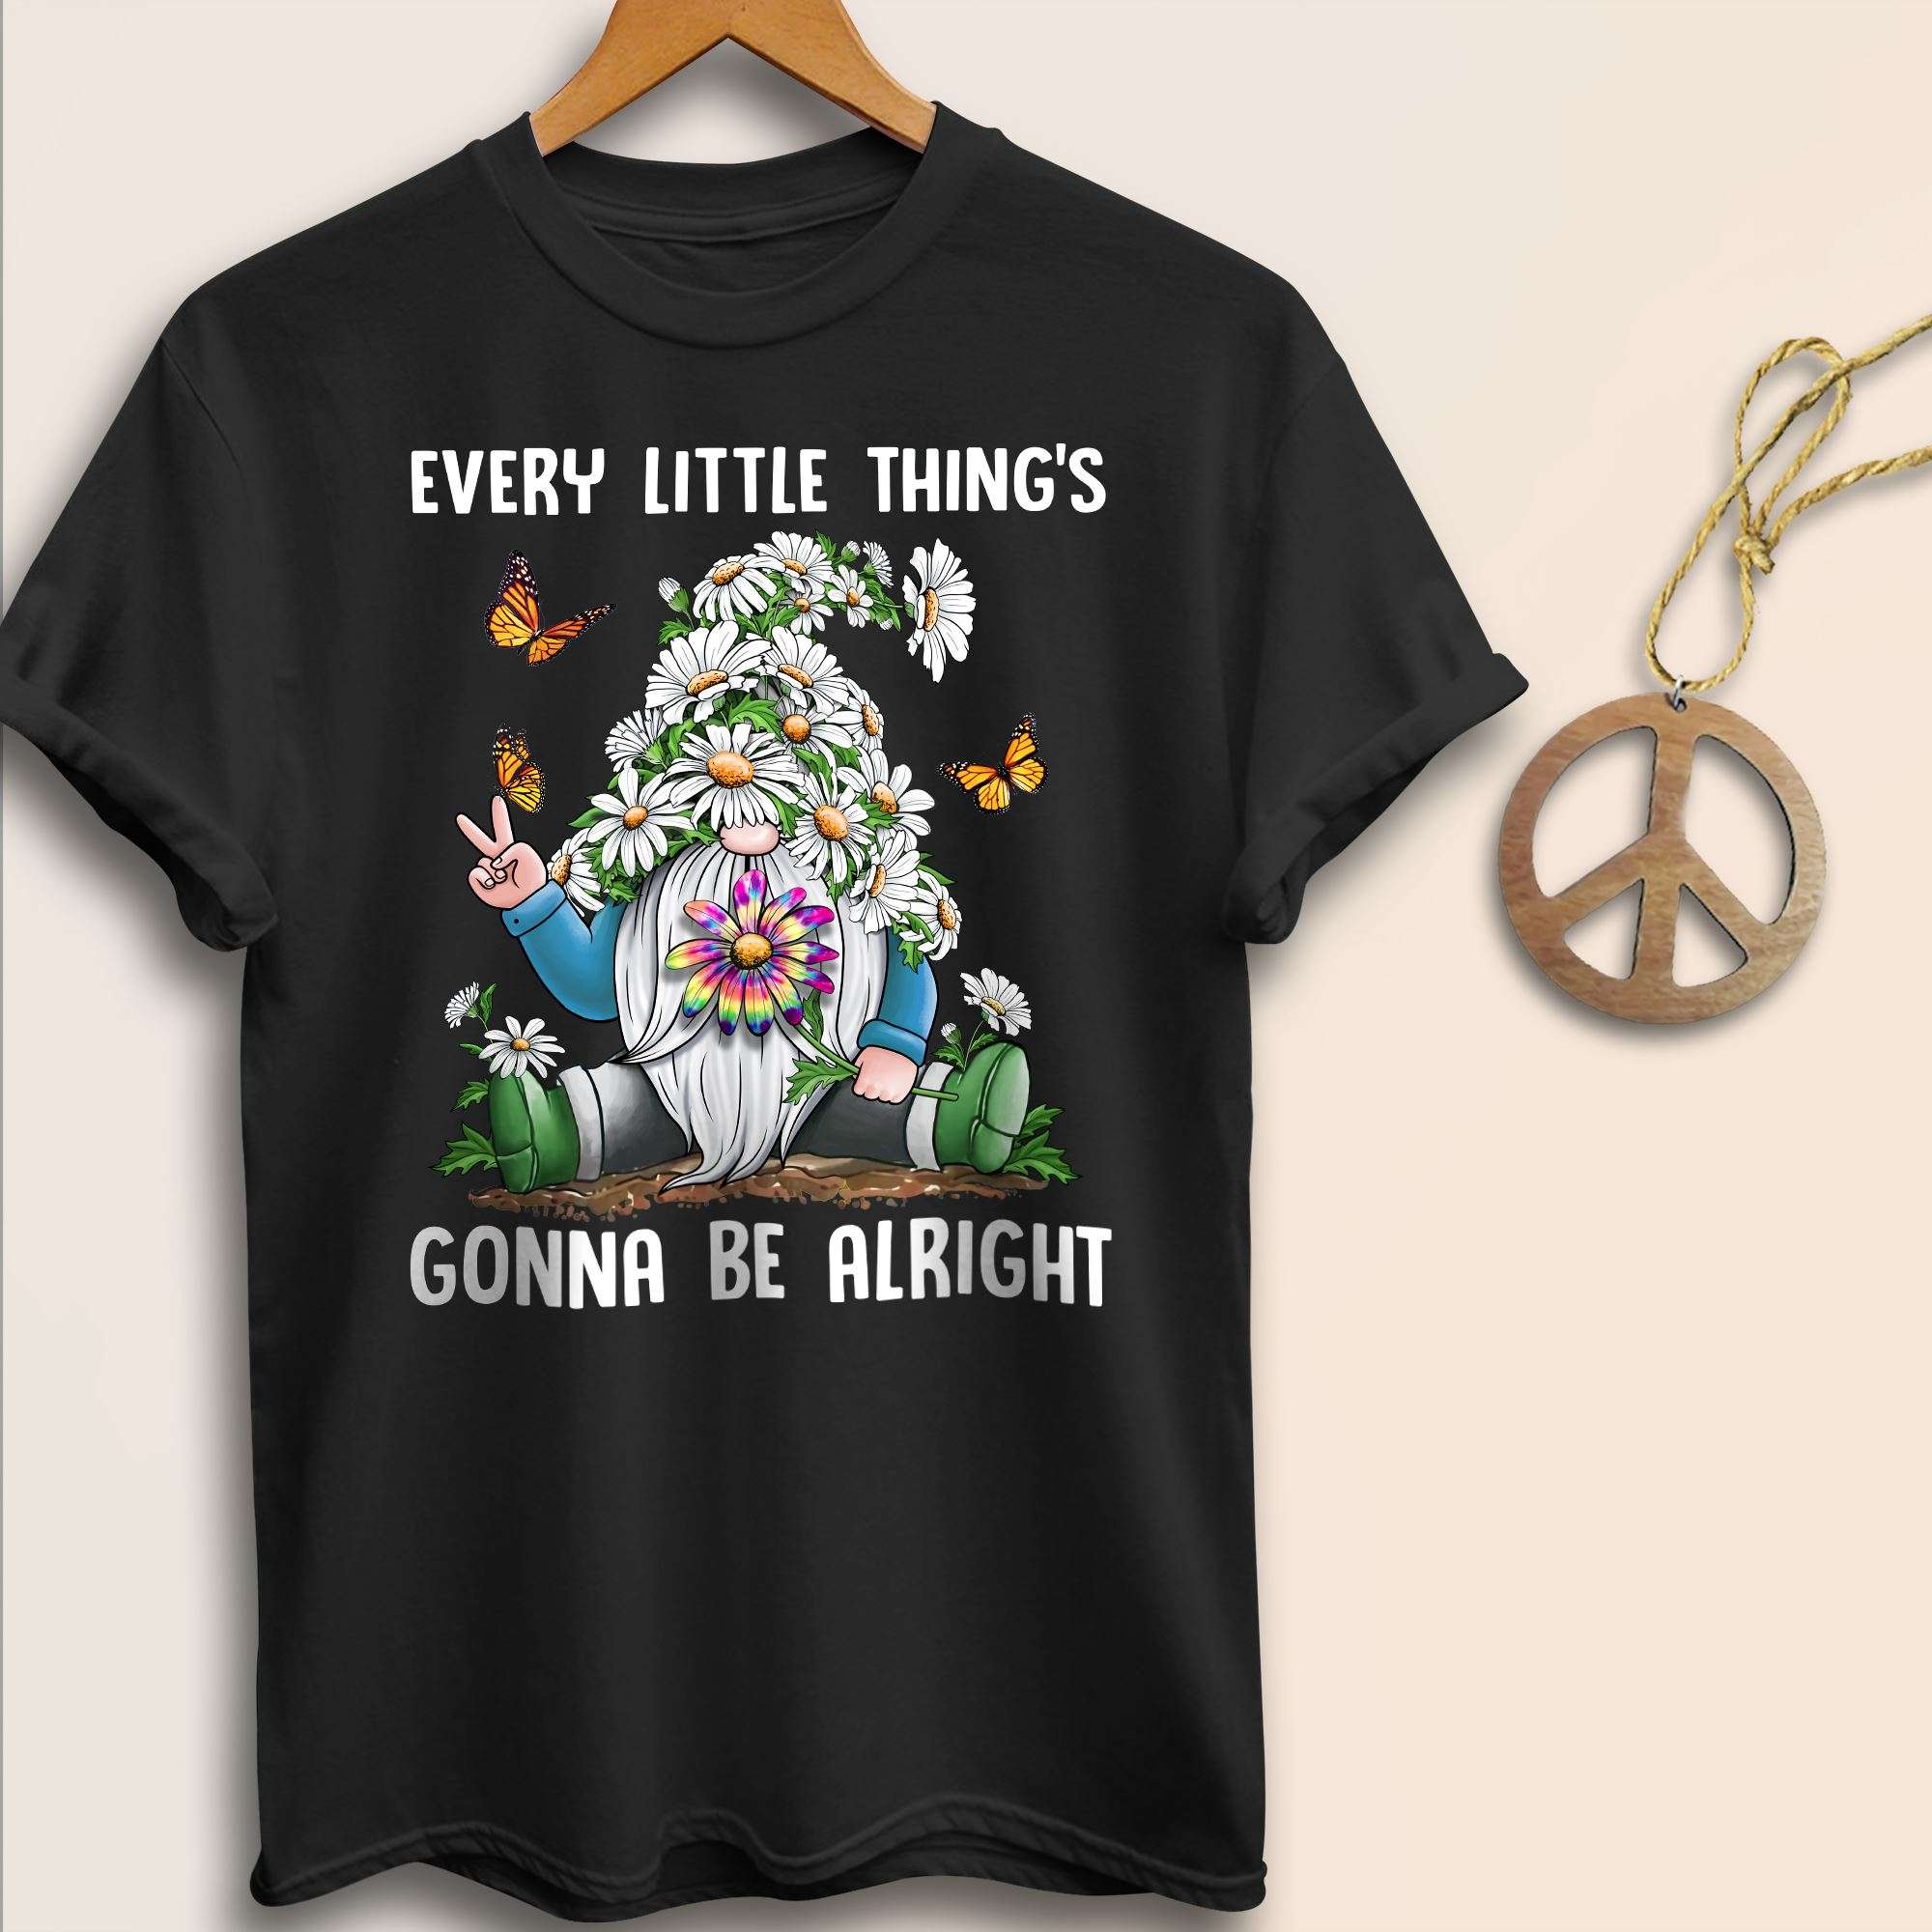 Gnomes With Daisy Flower - Every little thing's gonna be alright